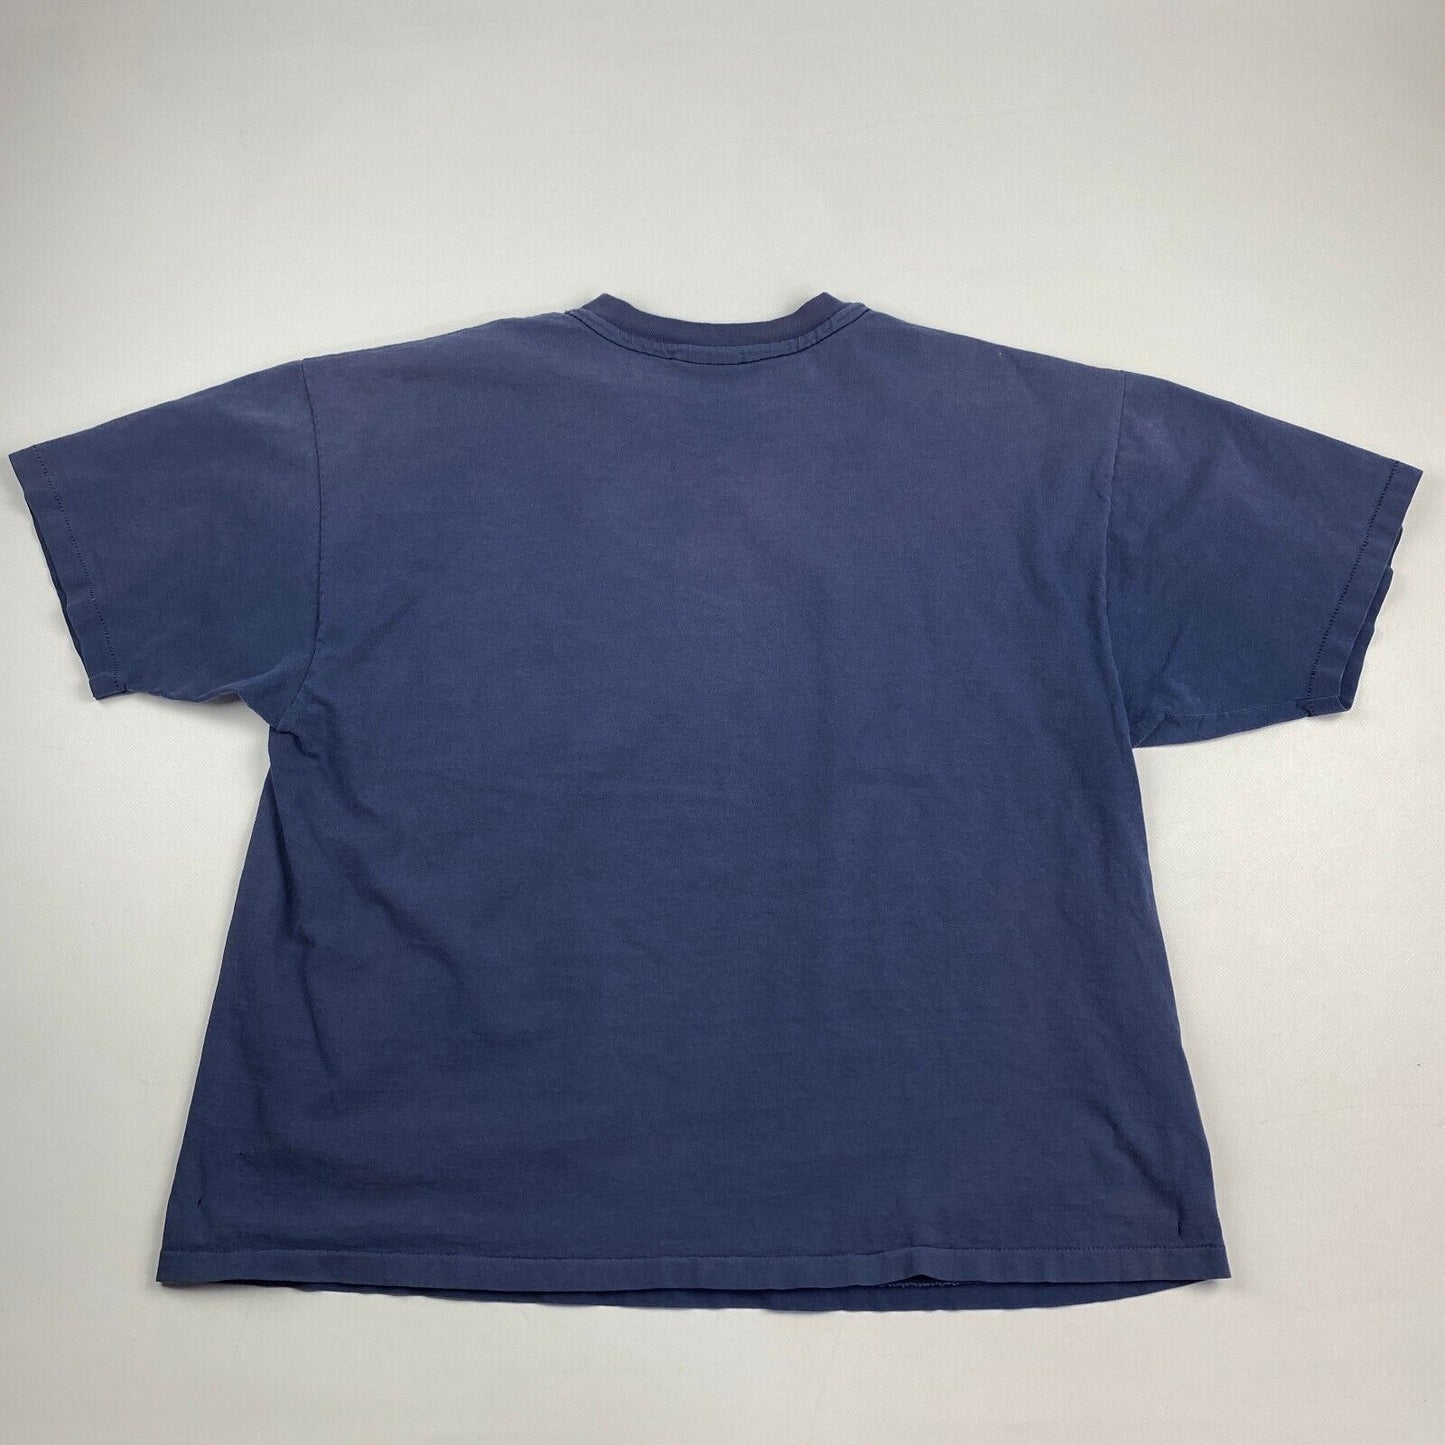 VINTAGE 90s Hanes Faded Distressed Navy Blank T-Shirt sz Large Men